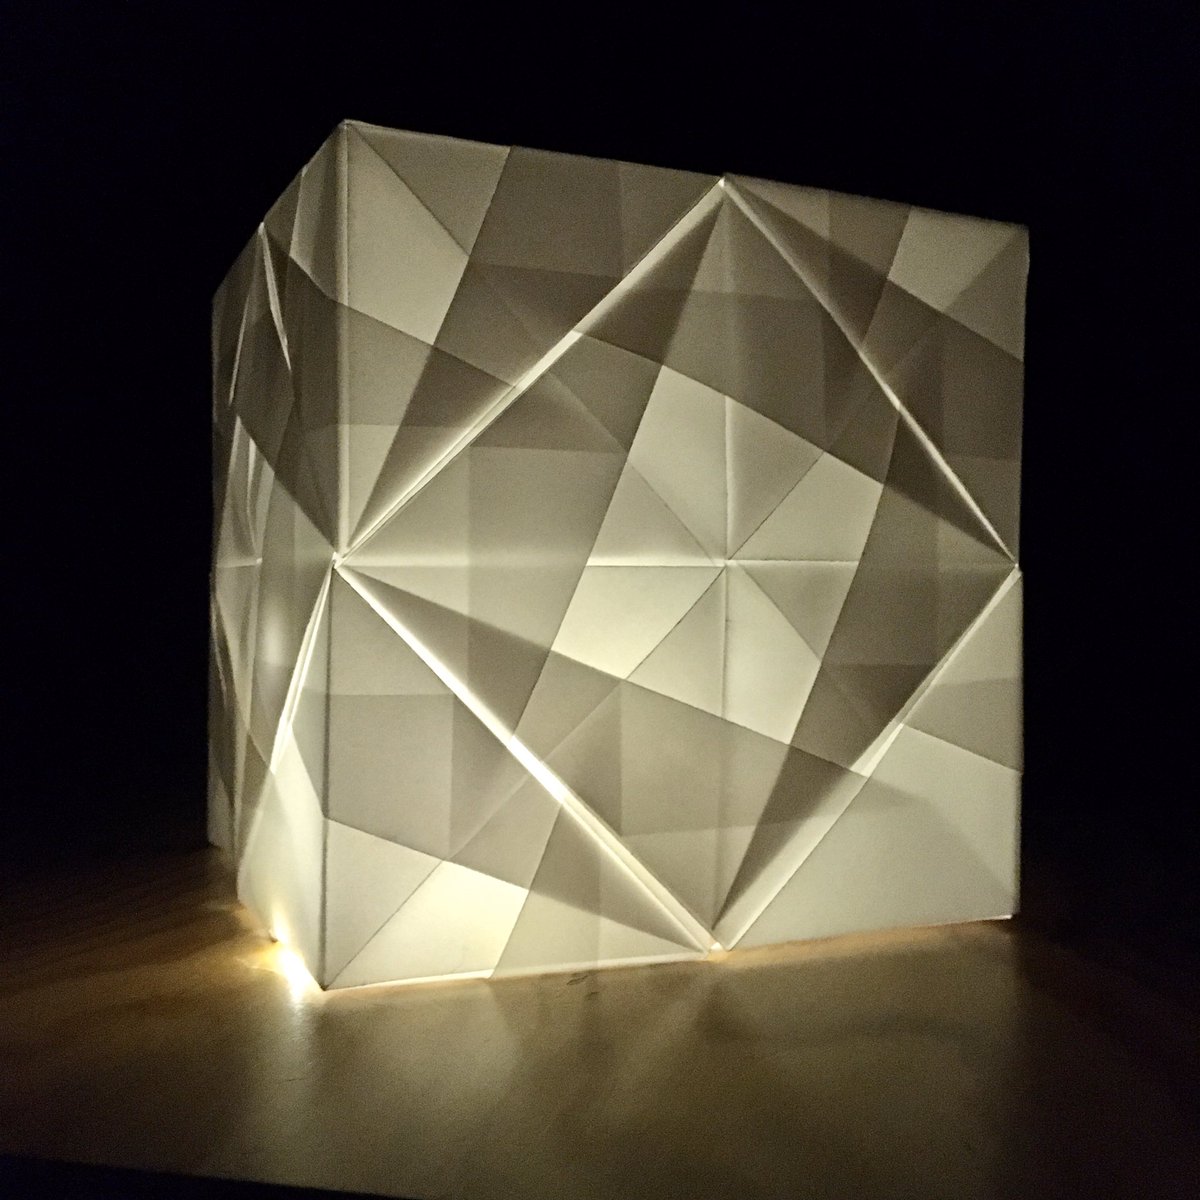 10) Light up your life with beautiful  #origami cube lampshades! Use baking or tracing paper with LED bulbs or fairy lights.10a) These instructions from  @origamifolding make the Sonobe lampshade below  https://origamitutorials.com/sonobe-cube-lamp-tutorial/ Can you spot the Pythagoras’ Theorem proof?